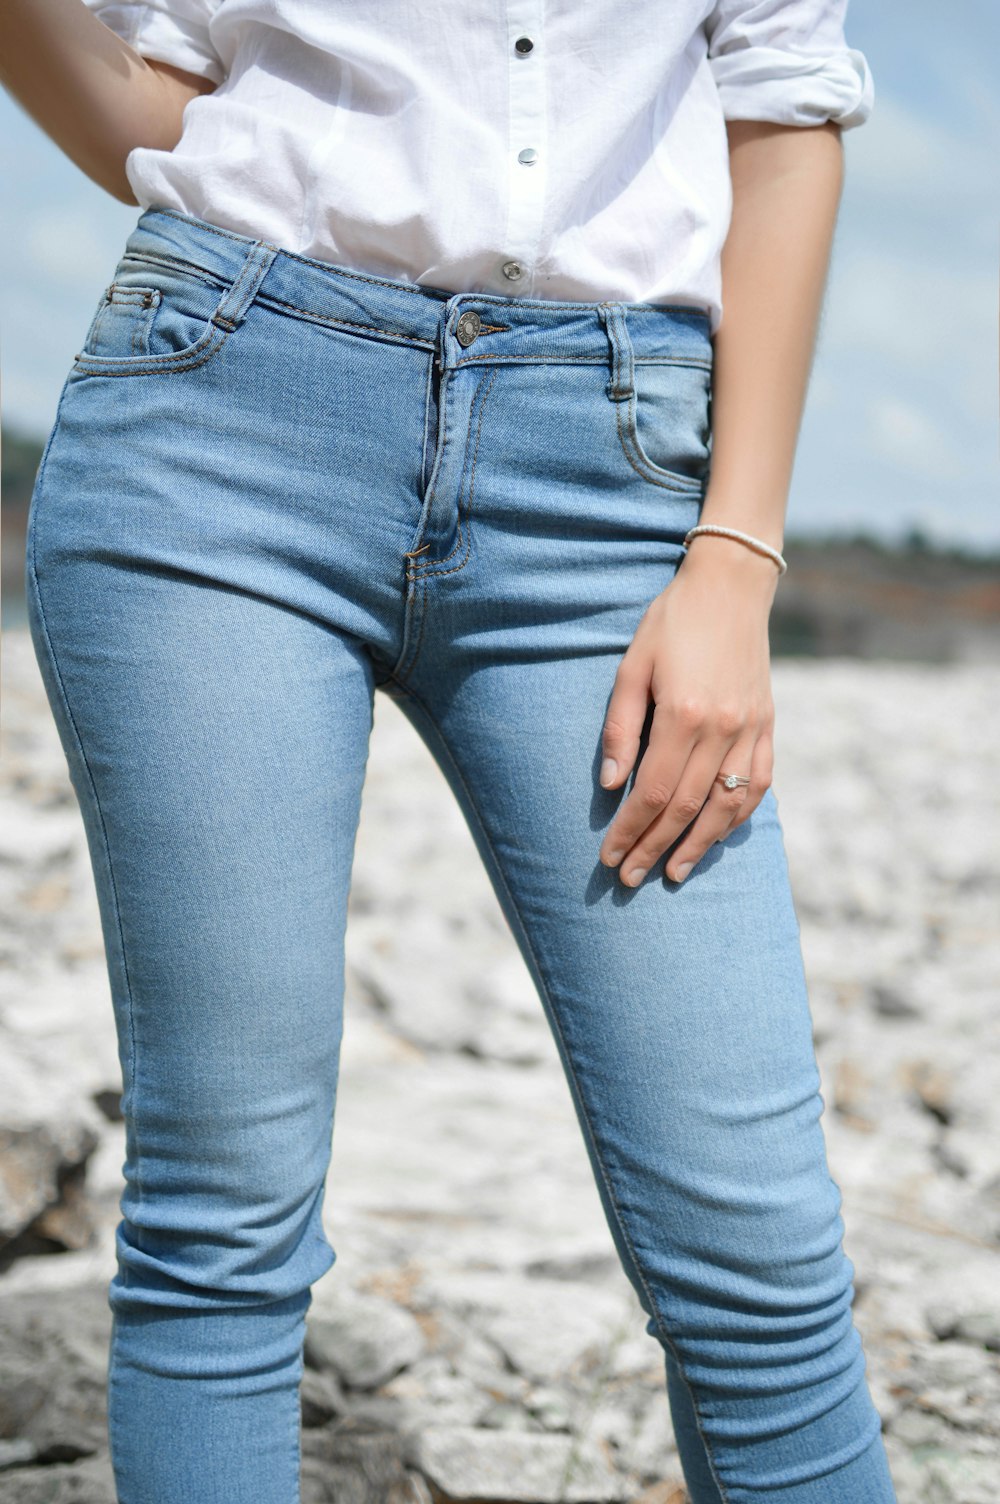 100+ Jeans Pictures | Download Free Images on Unsplash